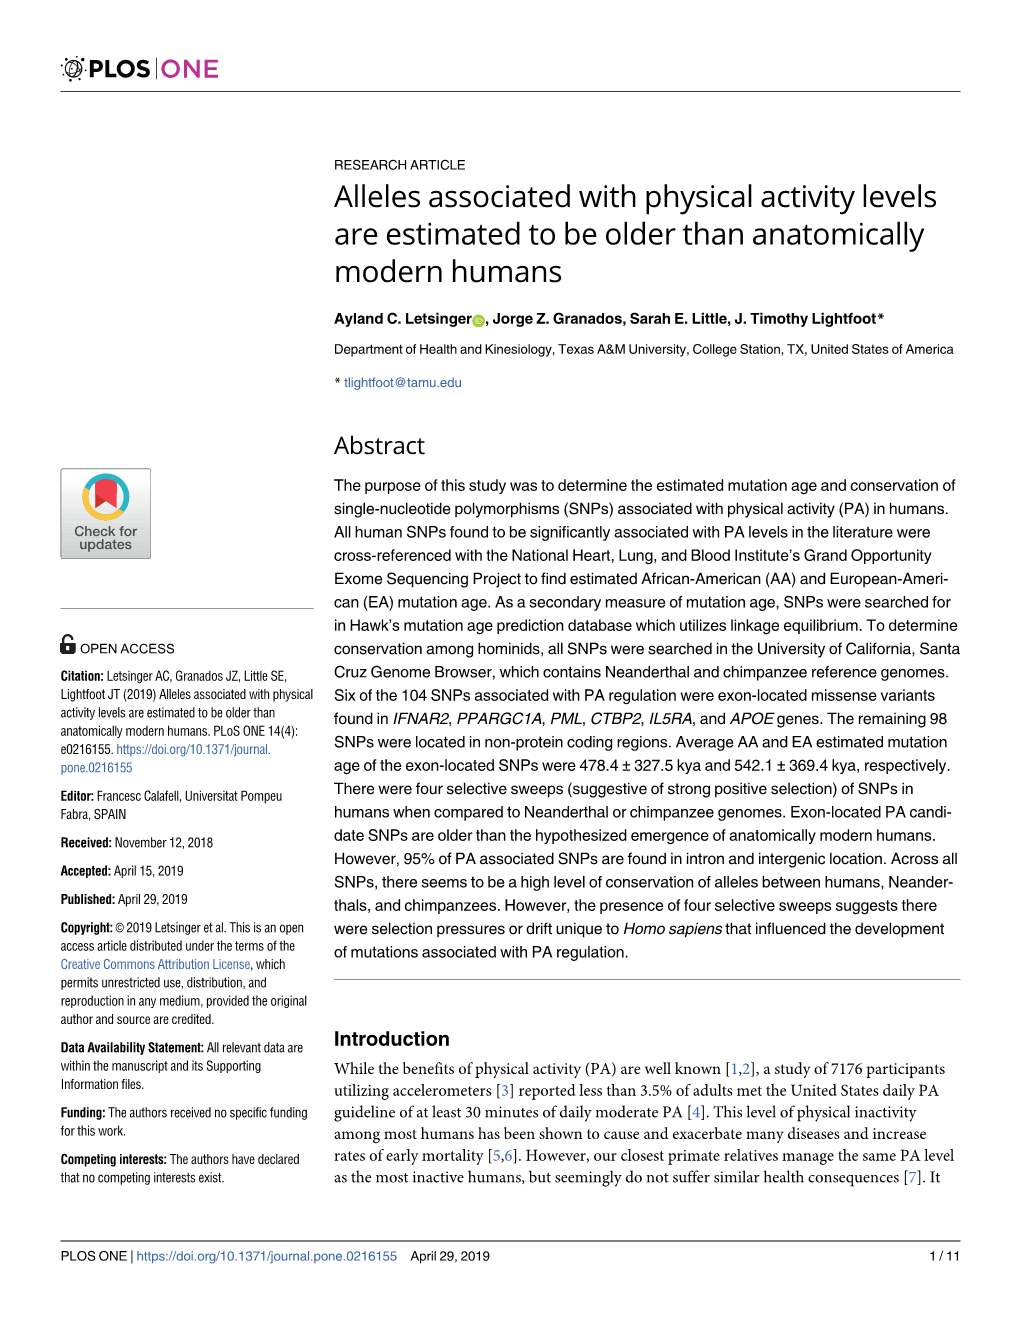 Alleles Associated with Physical Activity Levels Are Estimated to Be Older Than Anatomically Modern Humans